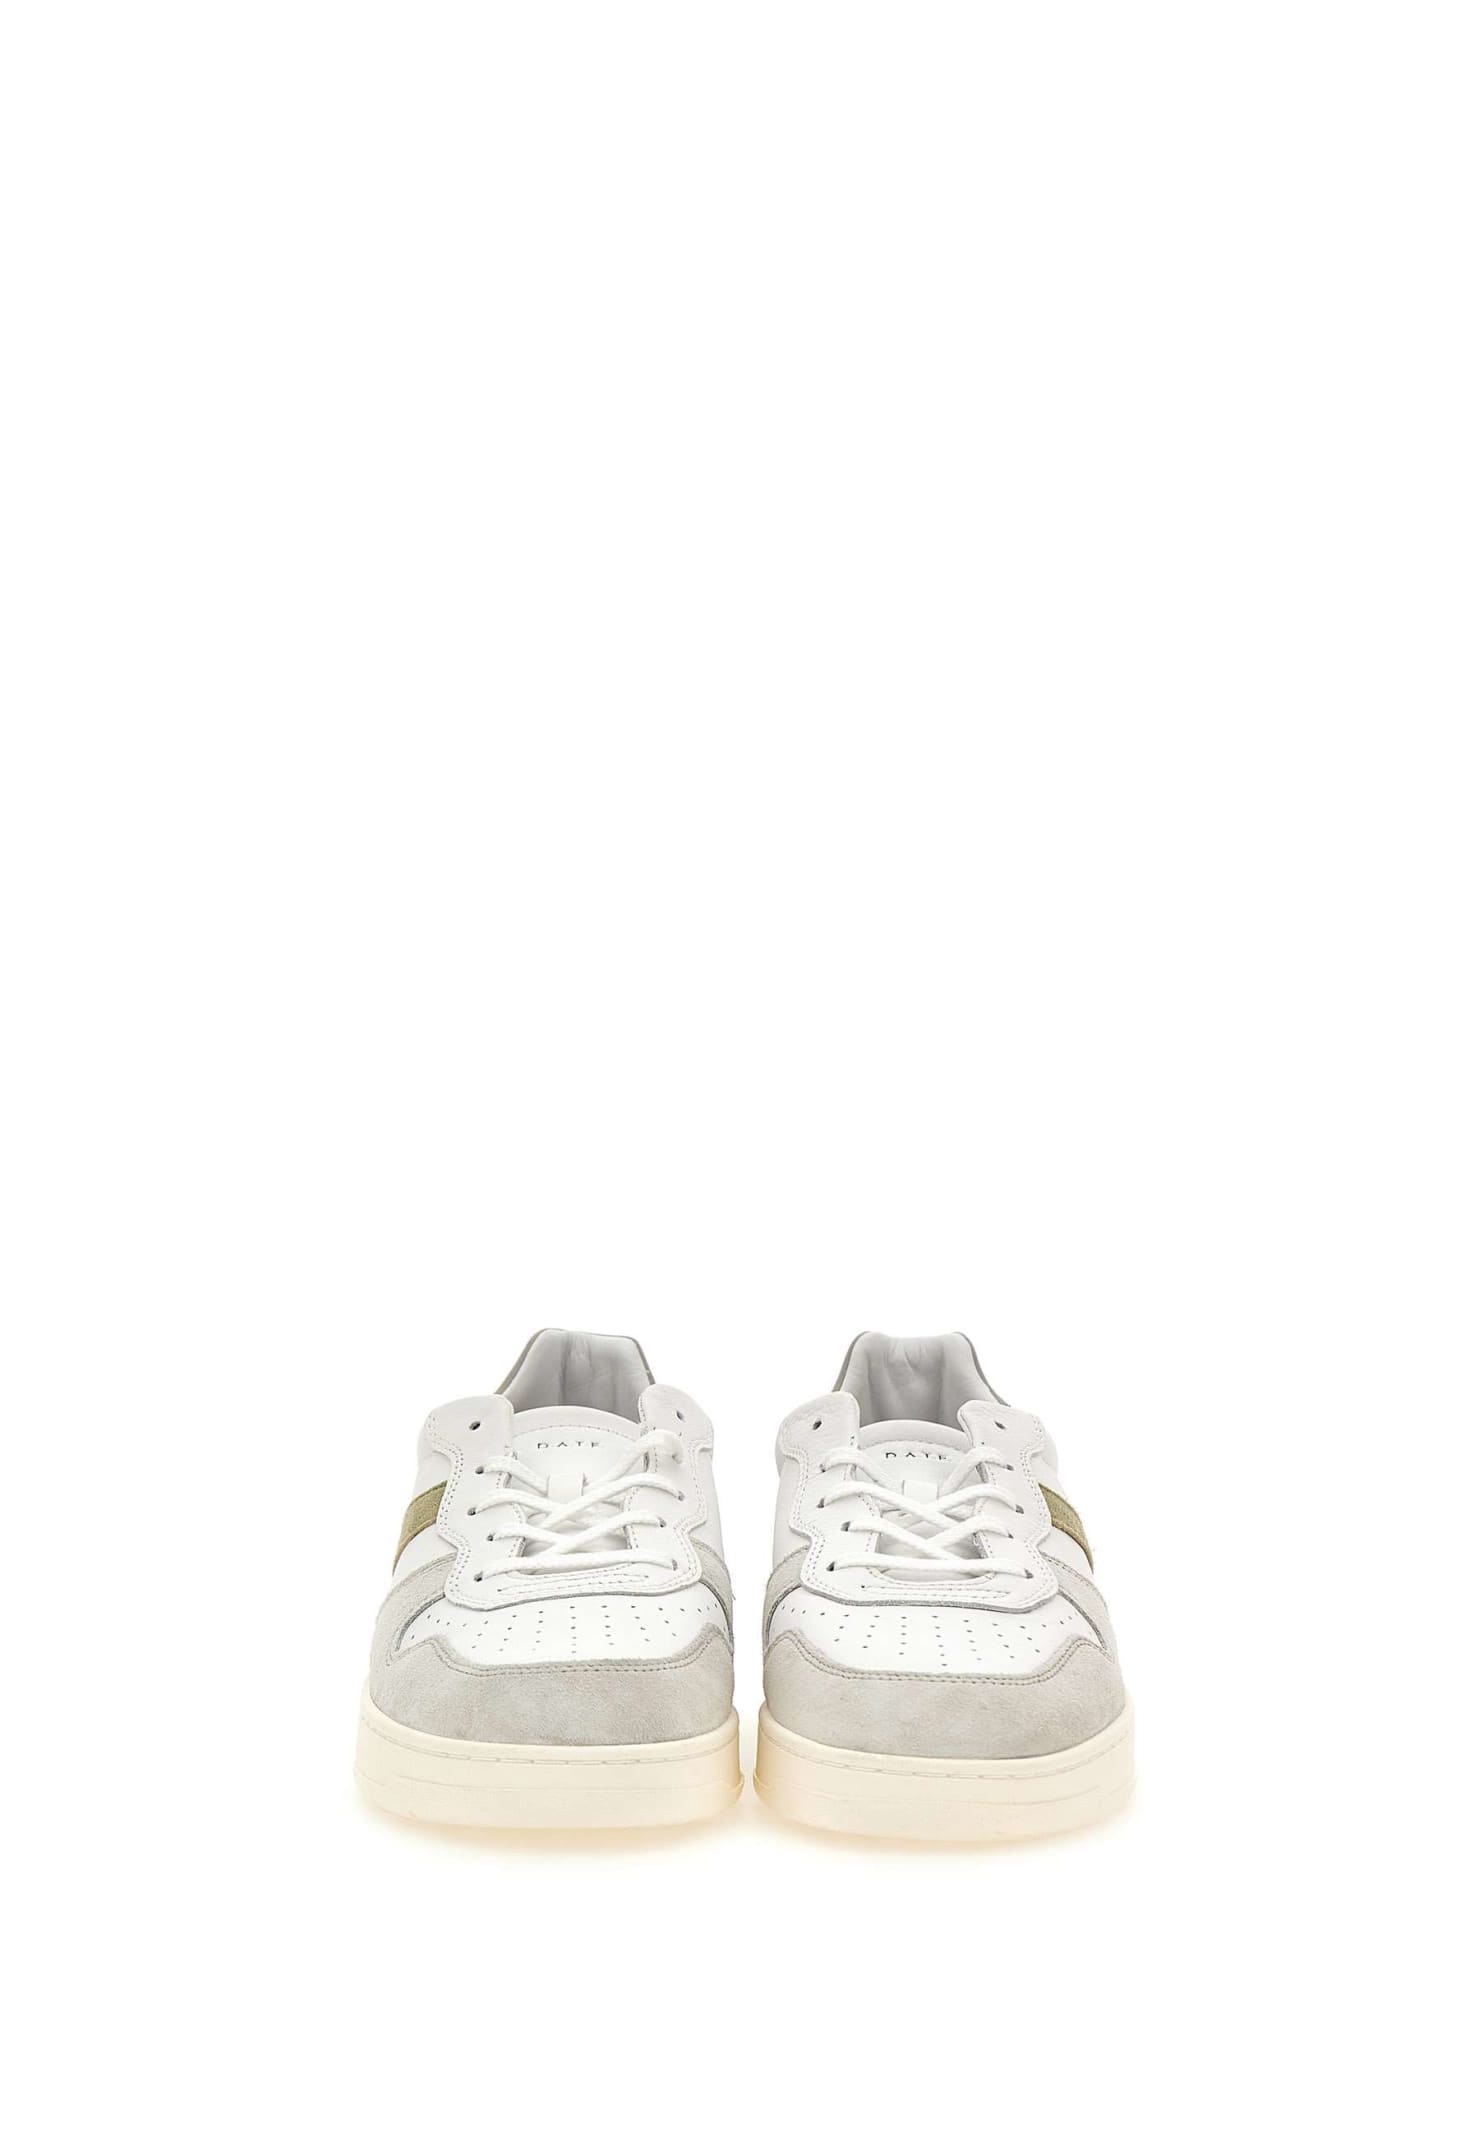 Shop Date Court 2.0 Vintage Leather Sneakers In White